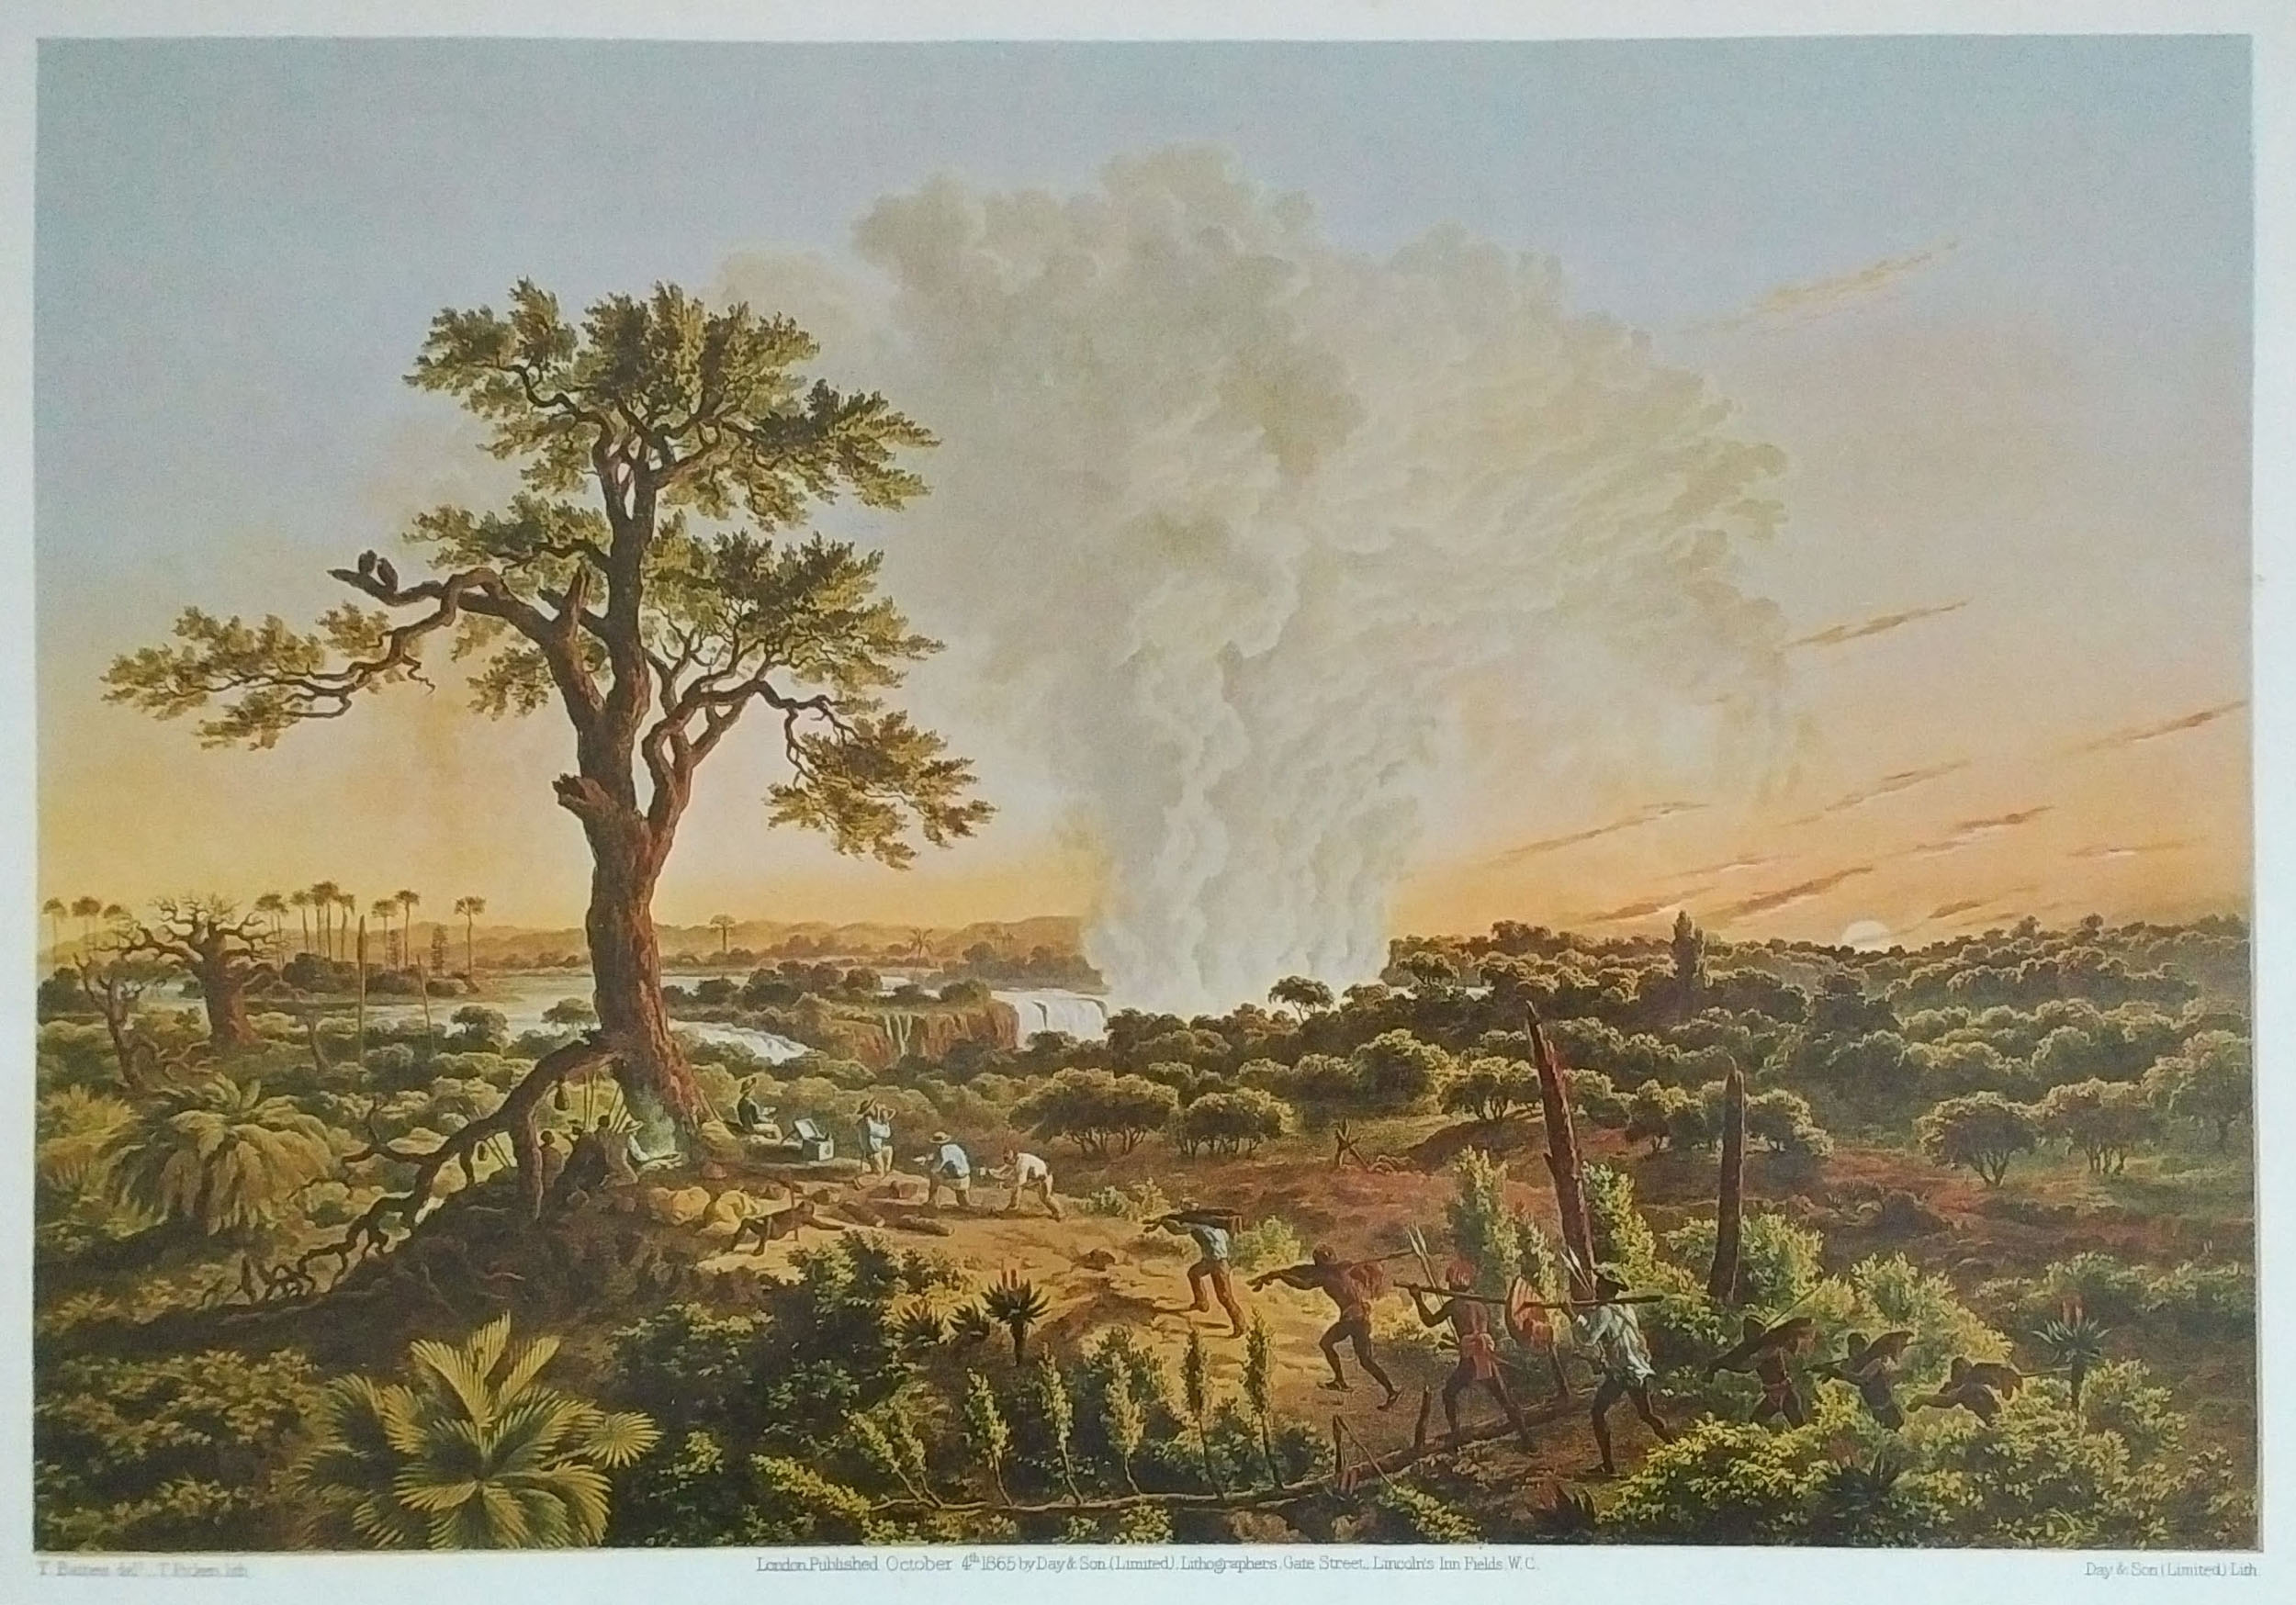 Image of Thomas Baines, The falls by sunrise, with the 'spray cloud' rising 1,2000 feet, c.1865. Copyright Kate Simpson. Creative Commons Attribution-NonCommercial 3.0 Unported (https://creativecommons.org/licenses/by-nc/3.0/).